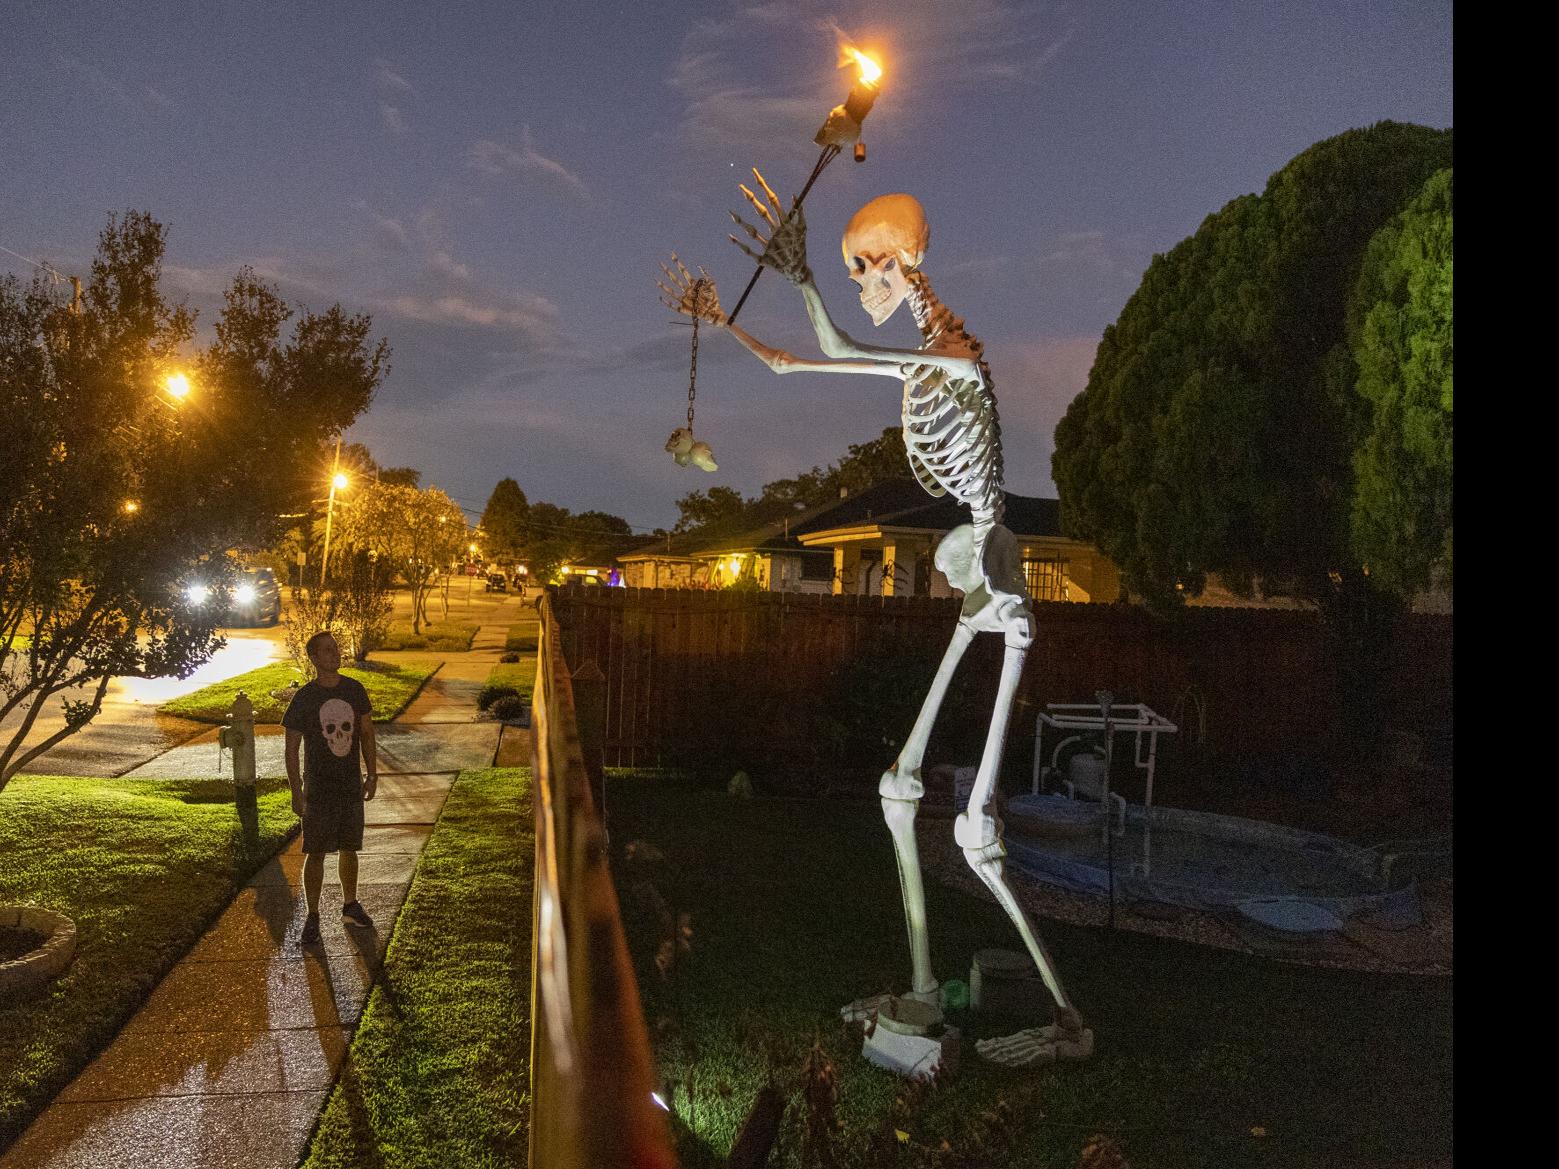 New Orleans goes big on Halloween: Giant skeletons, witches ...